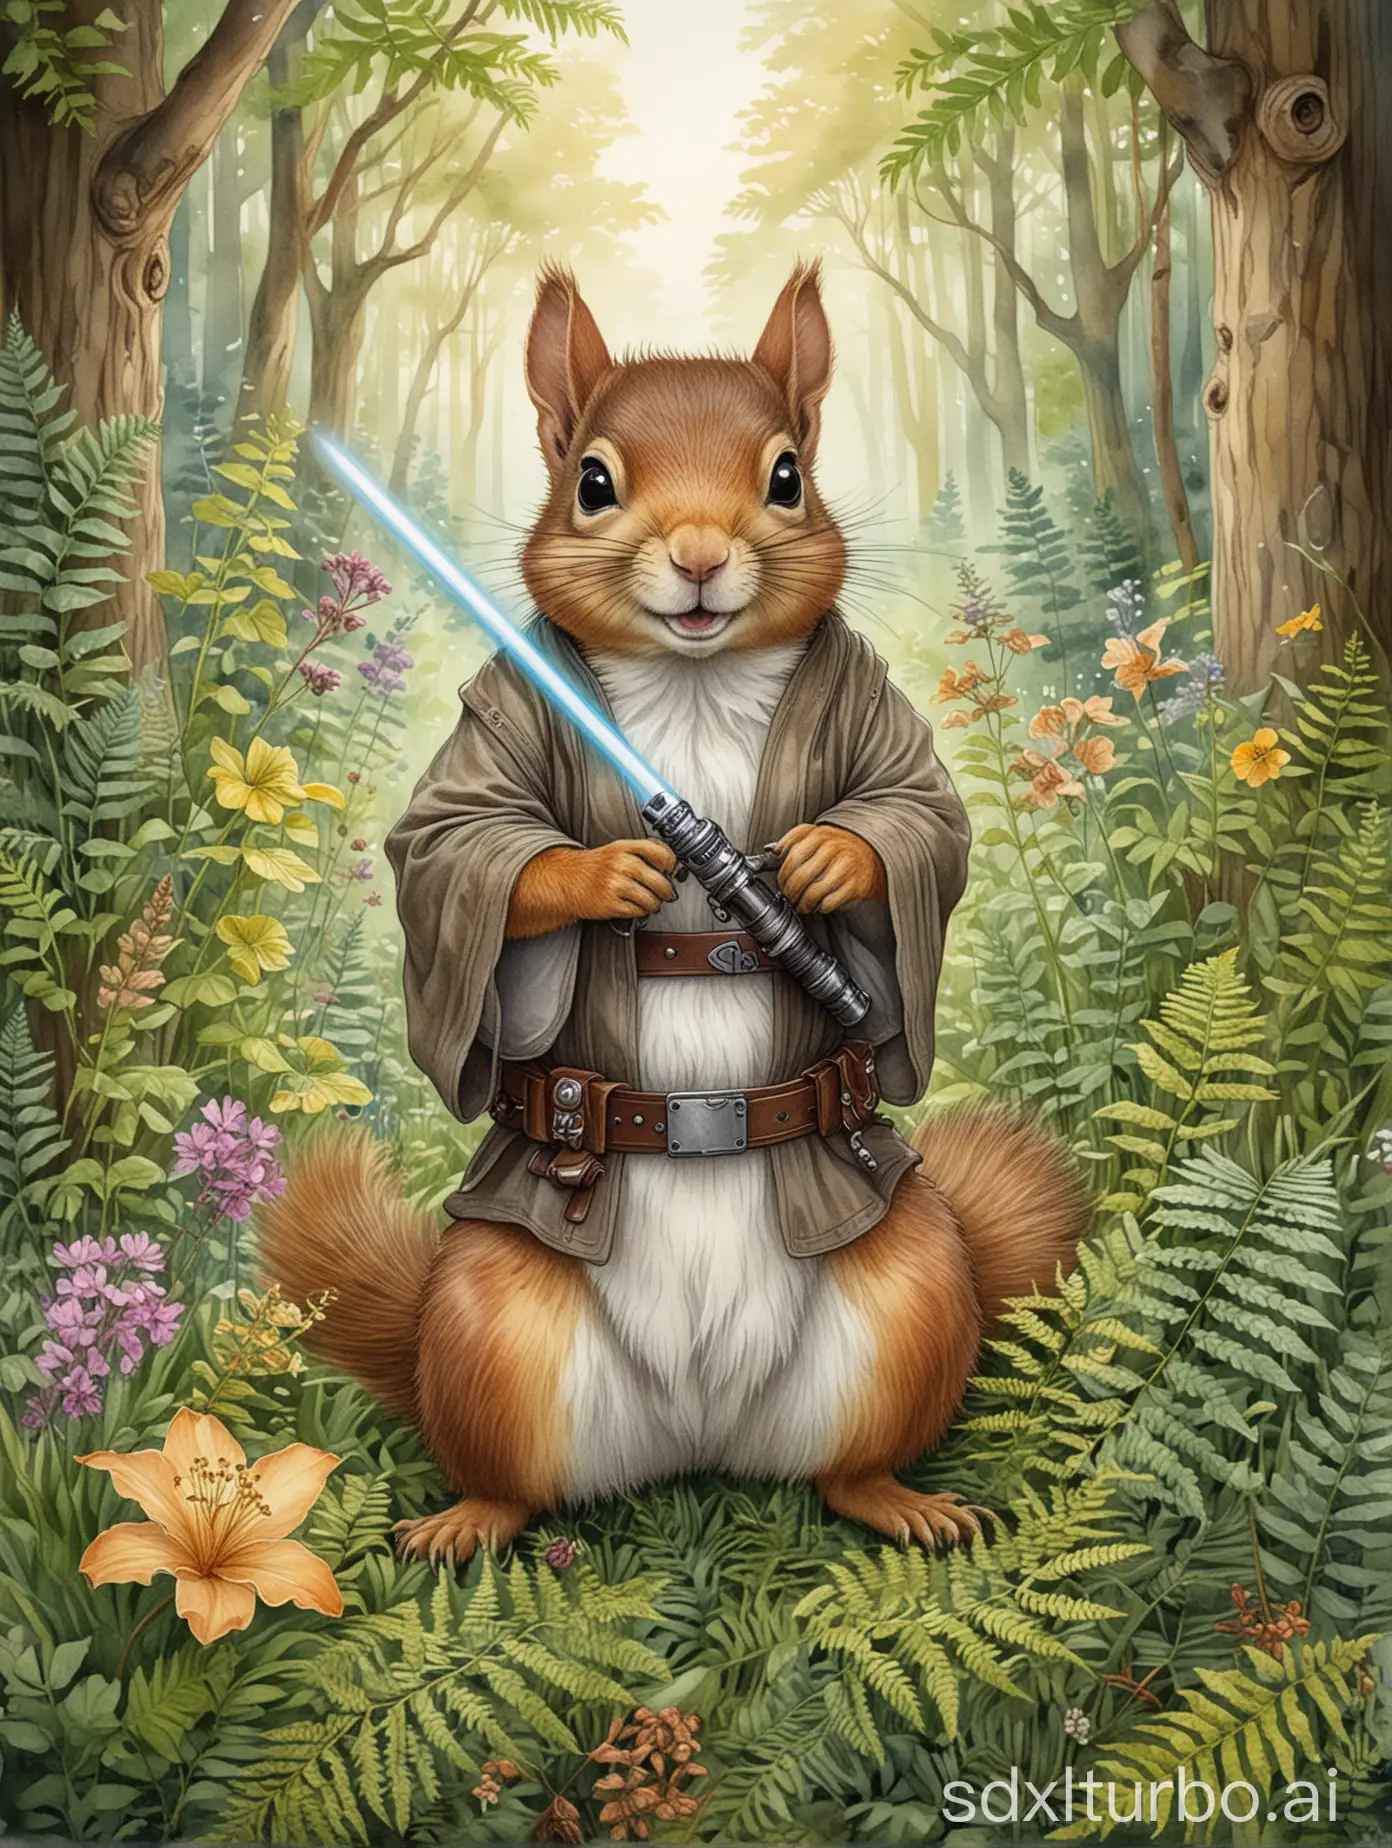 Jedi-Squirrel-Wielding-Lightsaber-in-Enchanted-Forest